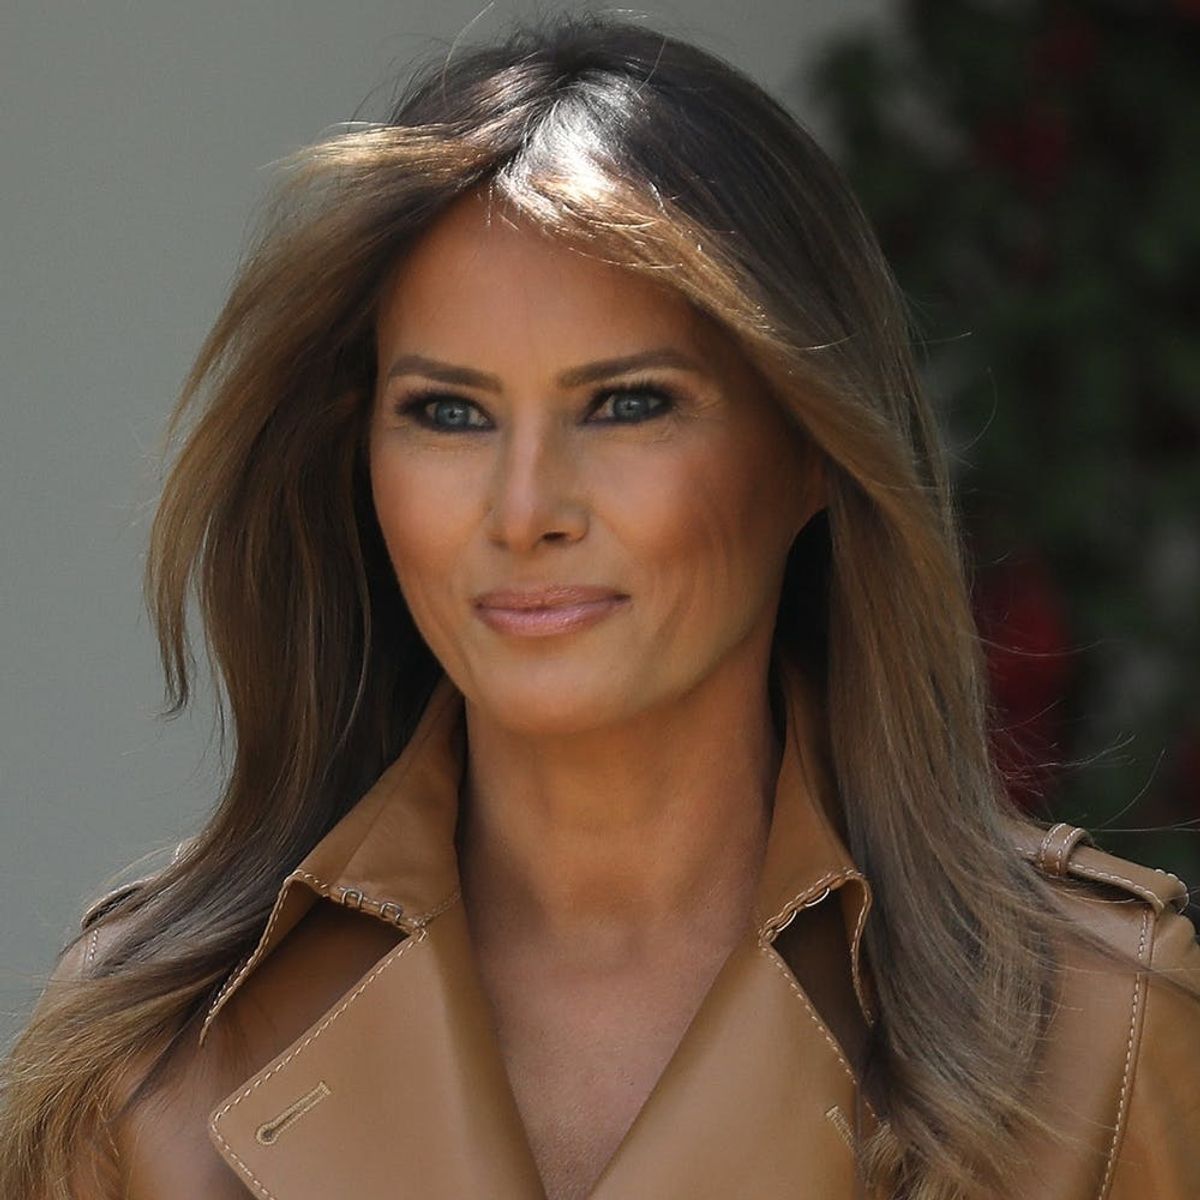 First Lady Melania Trump Is Recovering in the Hospital After a Kidney Procedure